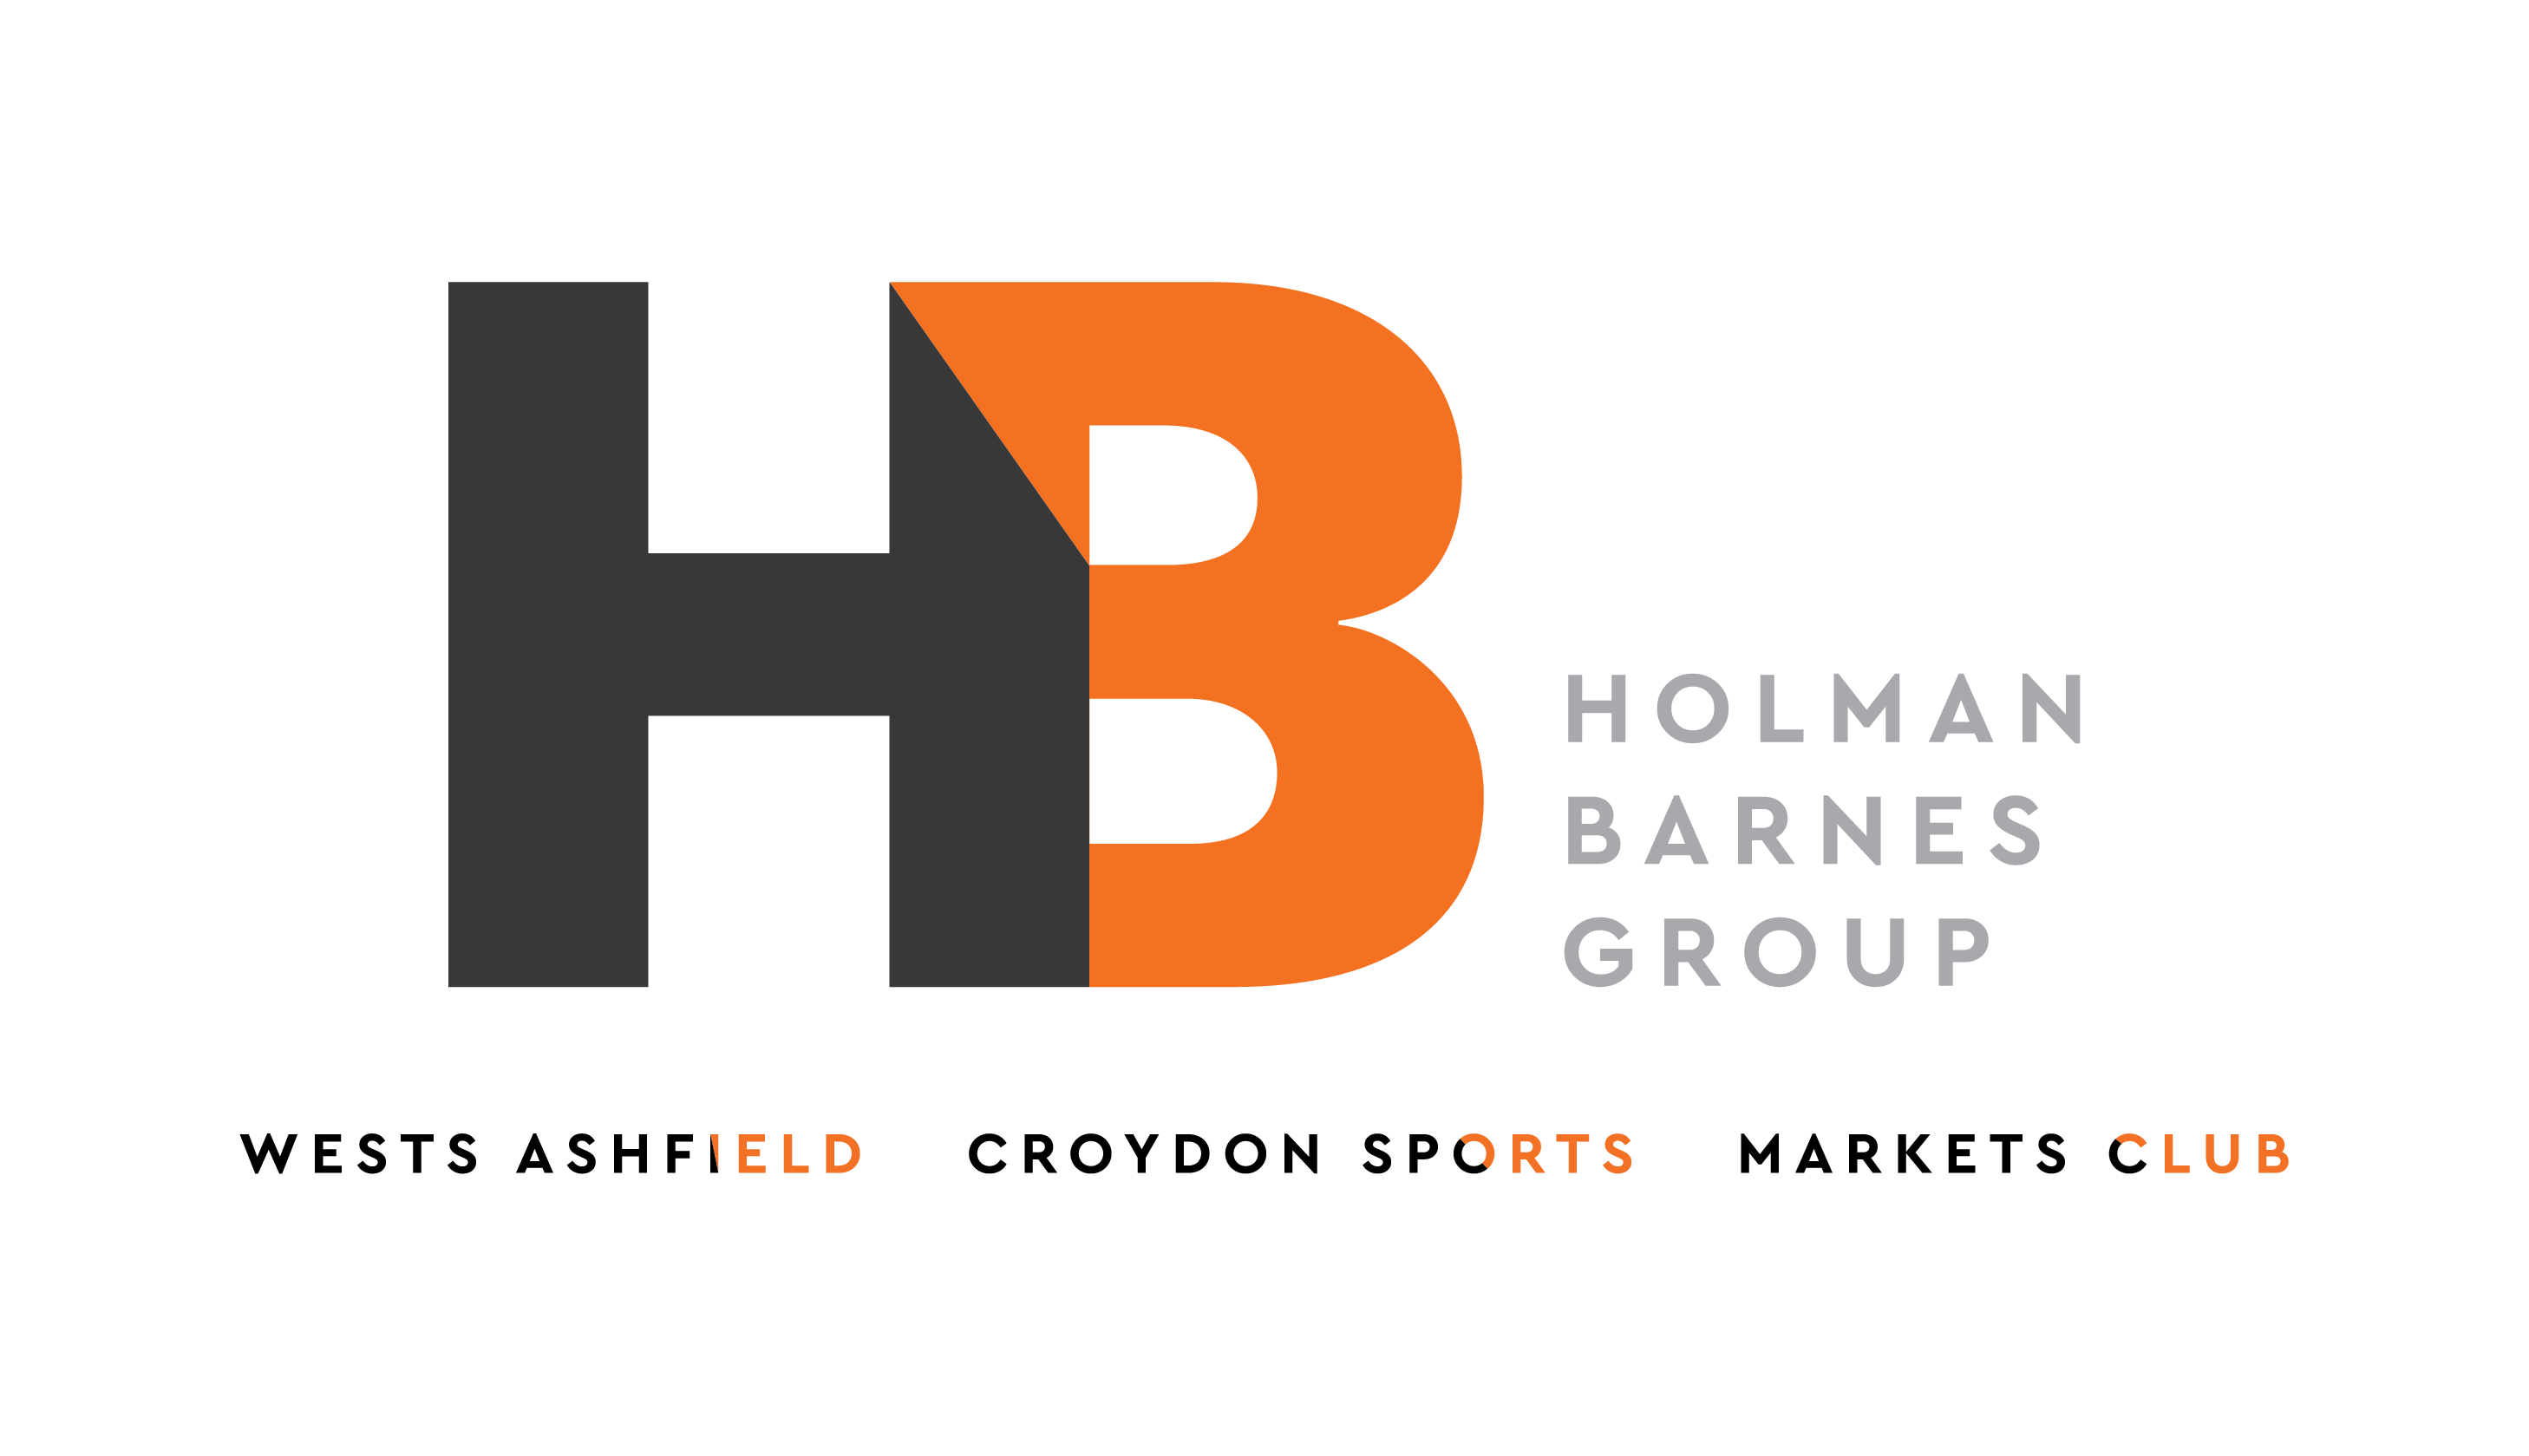 Graphic logo of grey and white text HB Holman Barnes Group Wests Ashfield Croydon Sports Markets Club